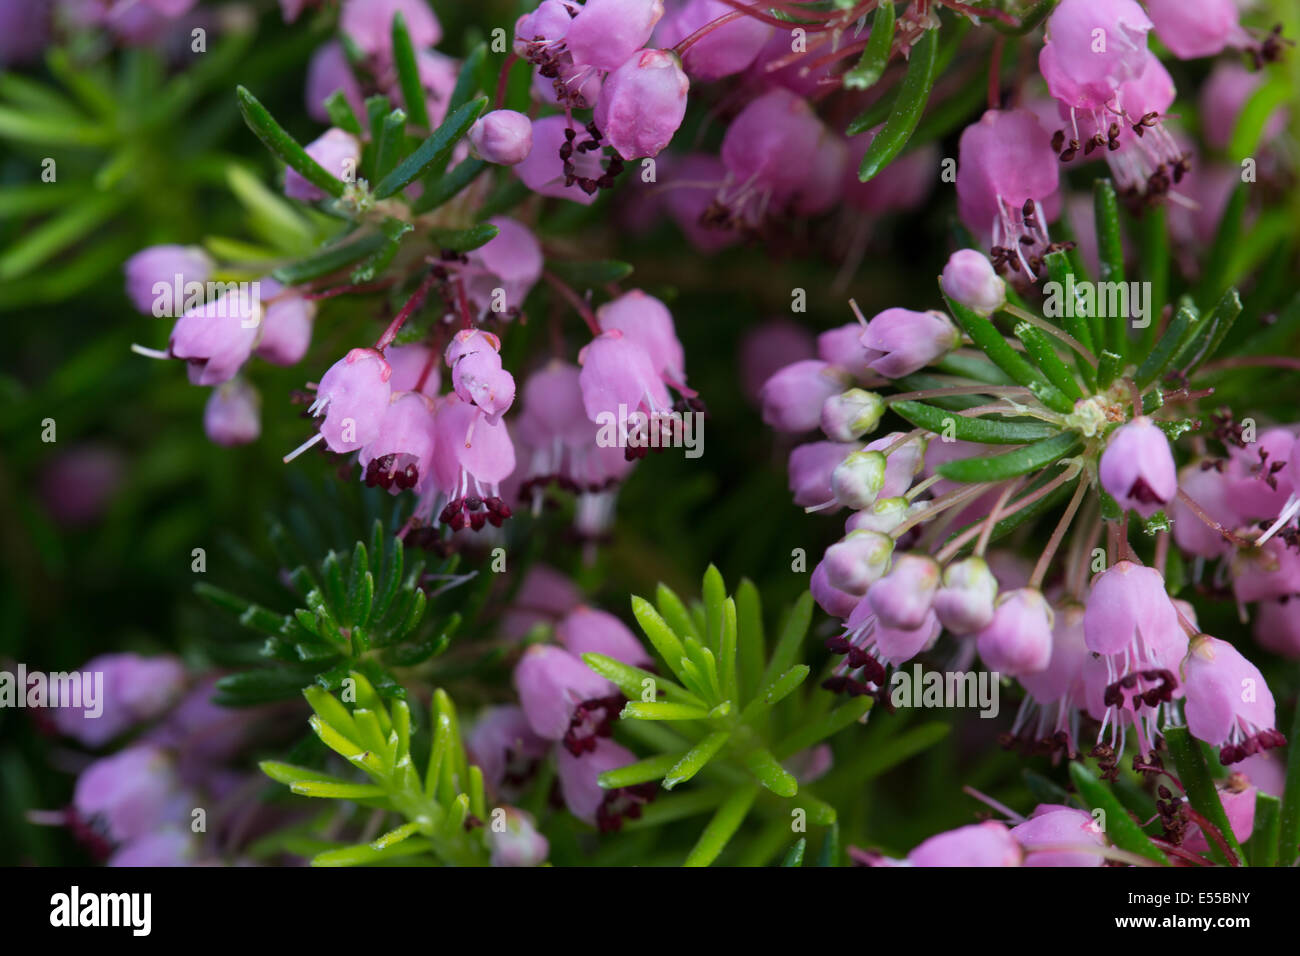 Pink heather flowers close-up Stock Photo